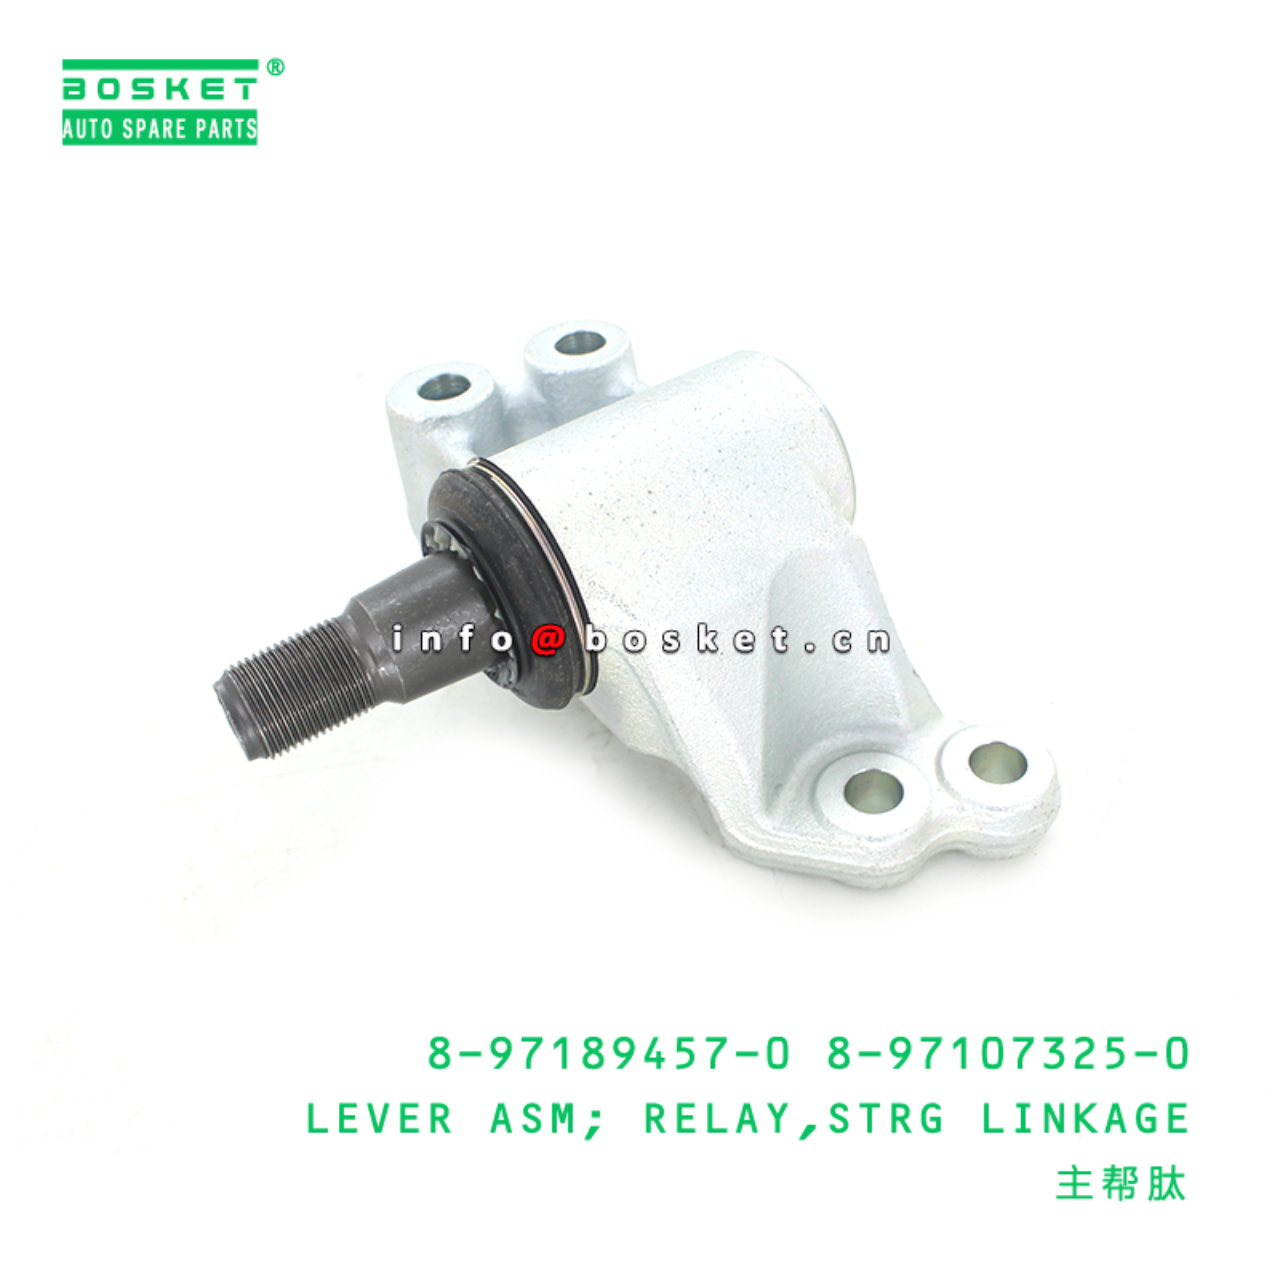 8-97189457-0 8-97107325-0 Steering Linkage Relay Lever Assembly 8971894570 8971073250 Suitable for I